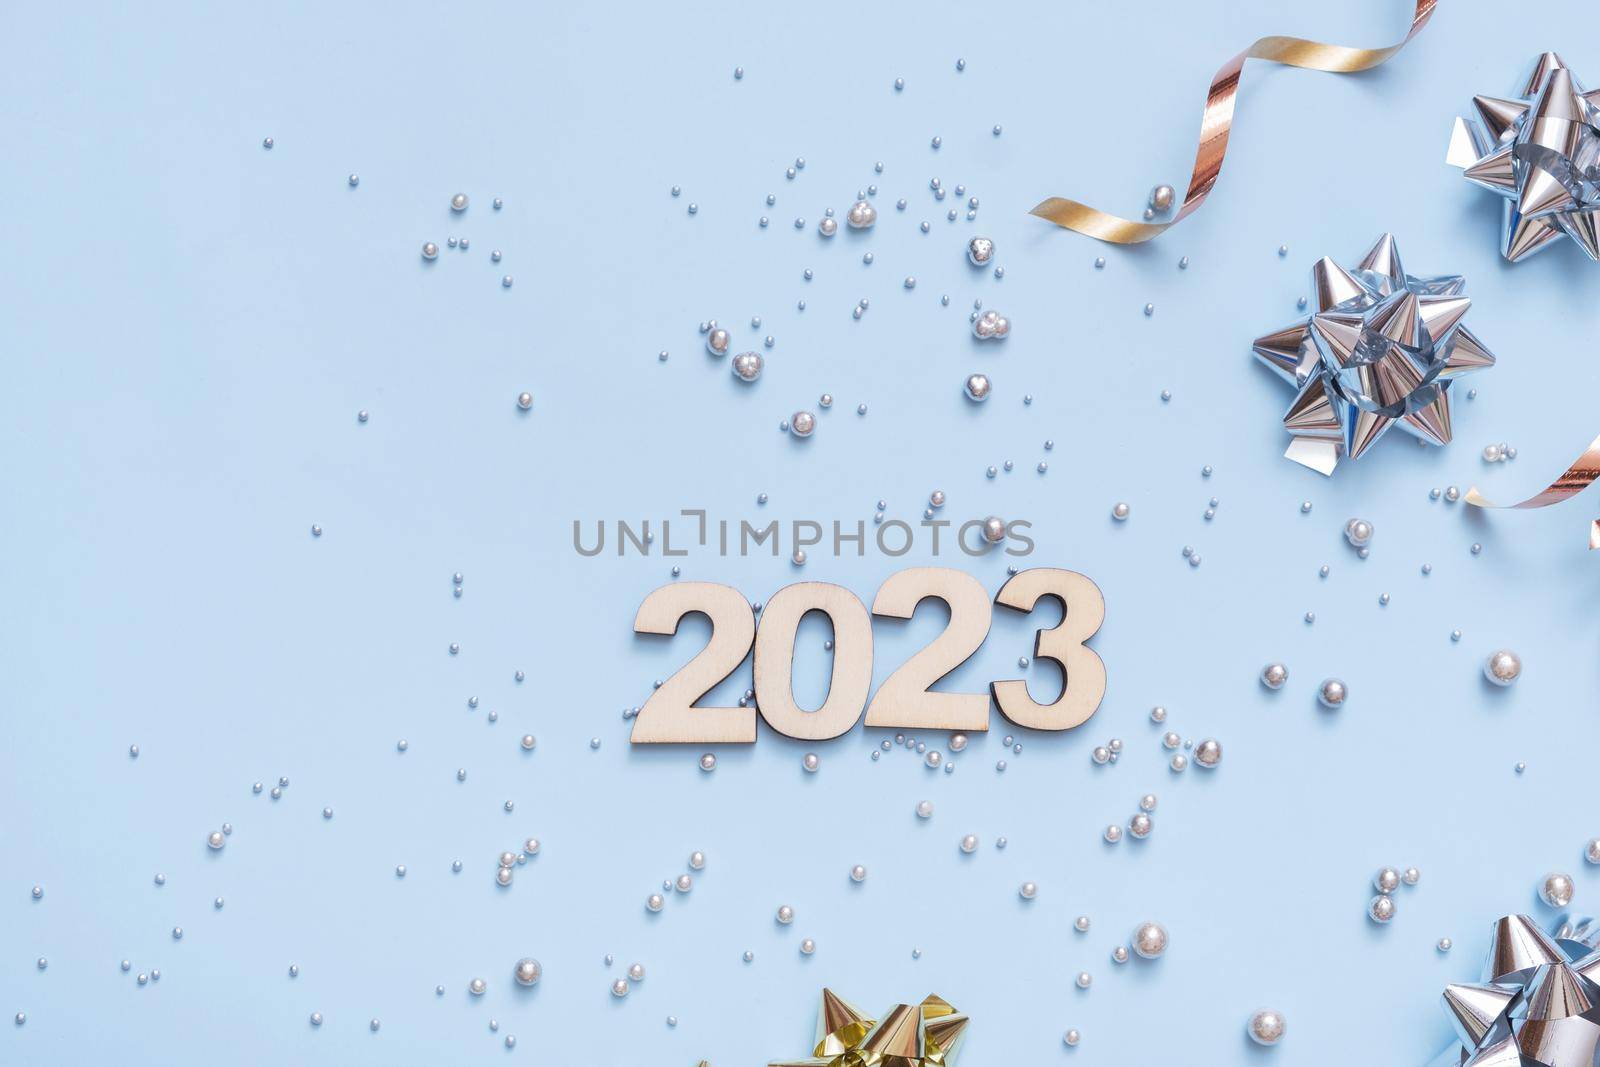 Numbers 2023 on bright festive background with bows and beads top view. New Year background flat lay.